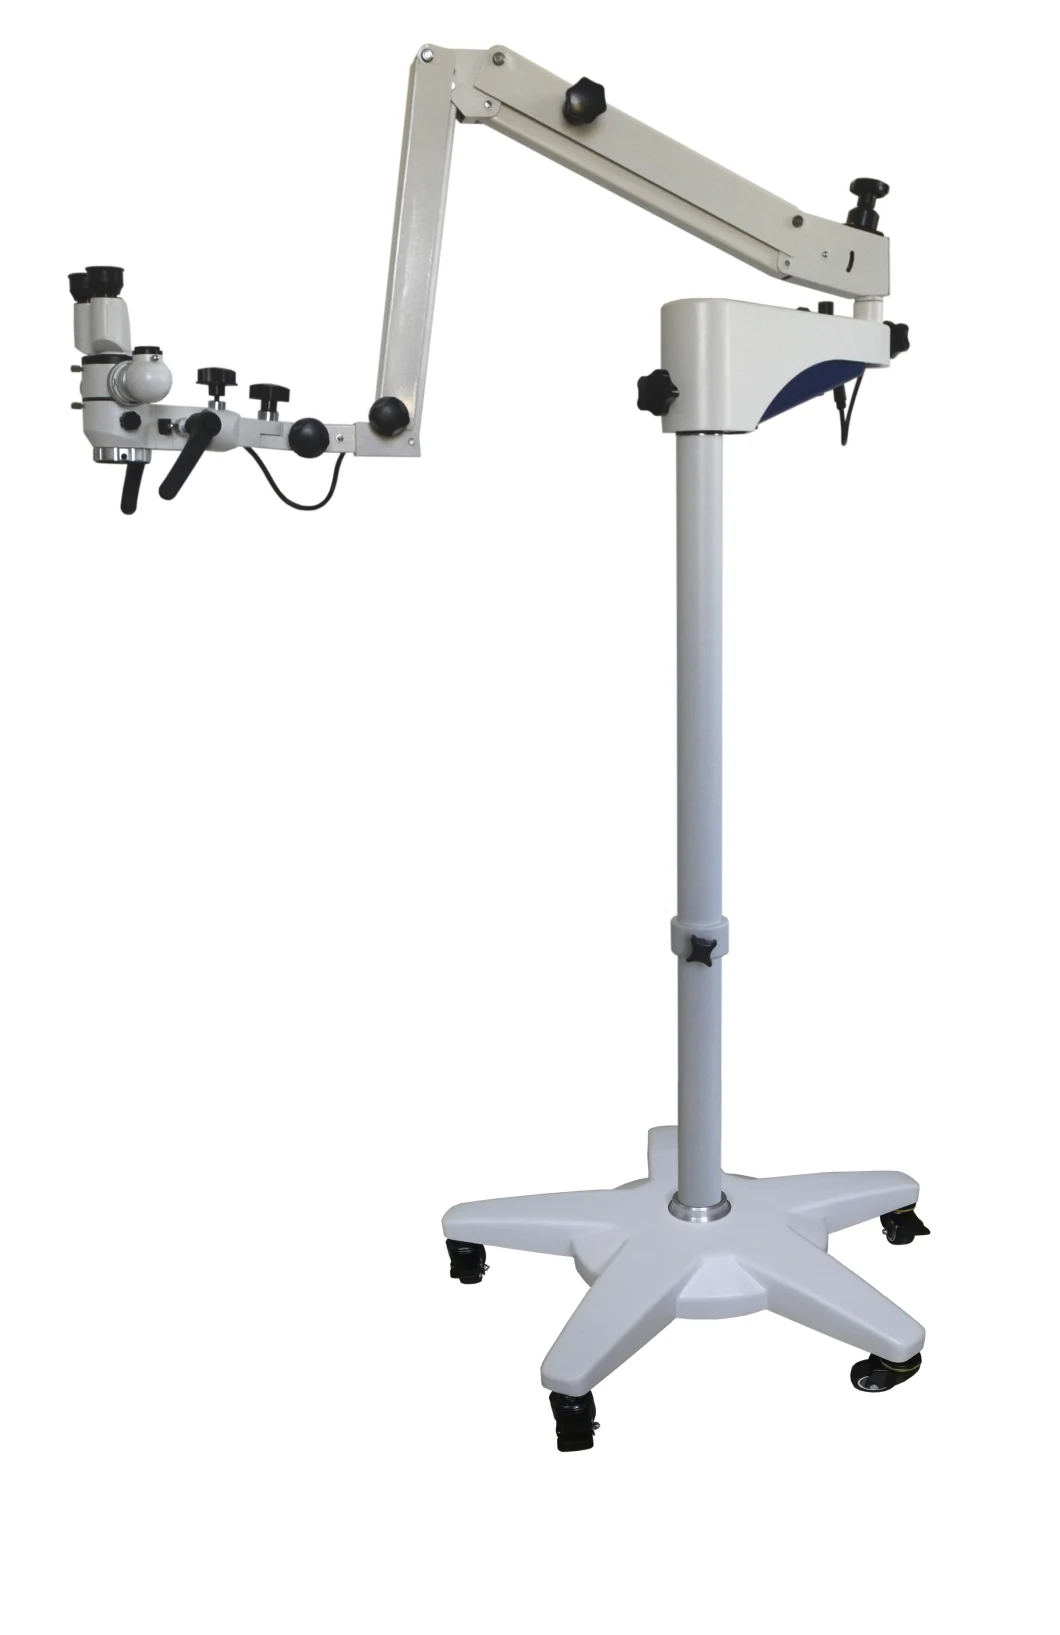 China Factory Surgical Multipurpose Hospital Operating Operation Microscope for Ent